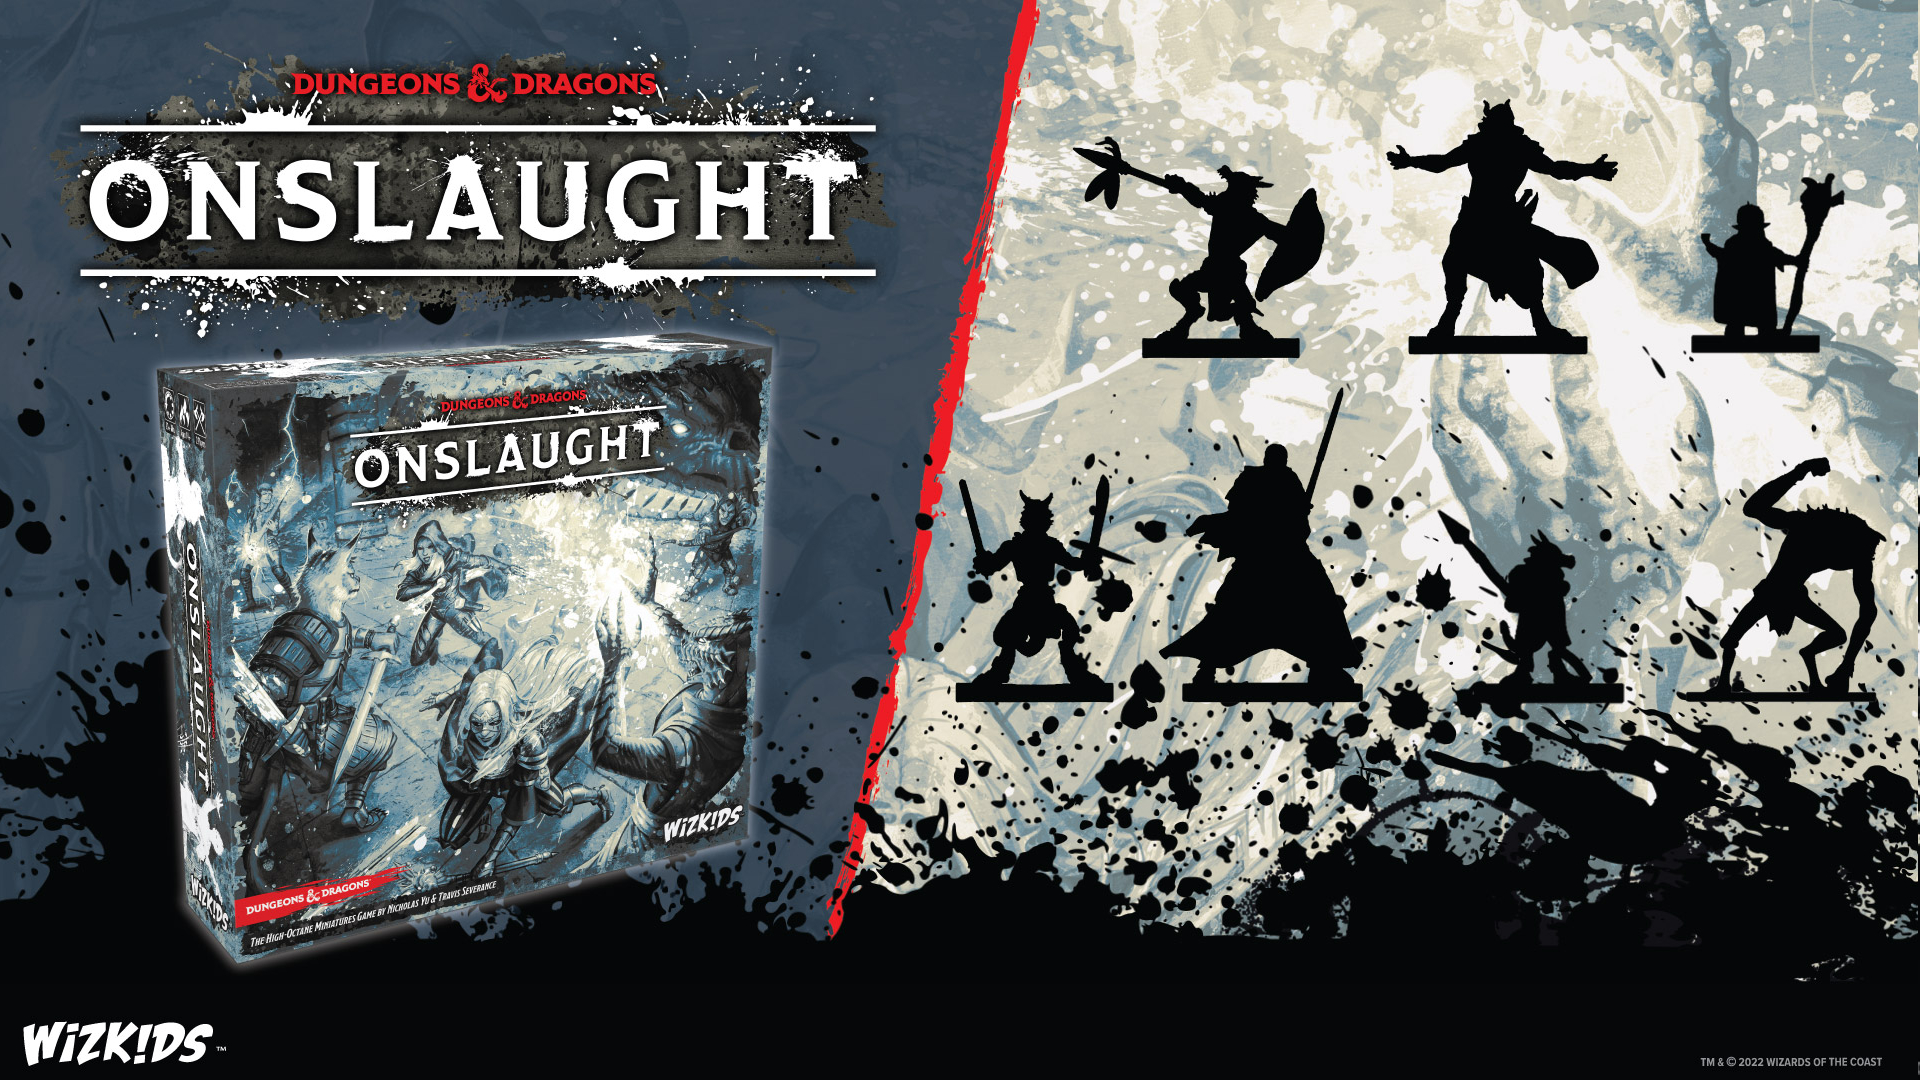 Dungeons & Dragons Onslaught Reveals Photo